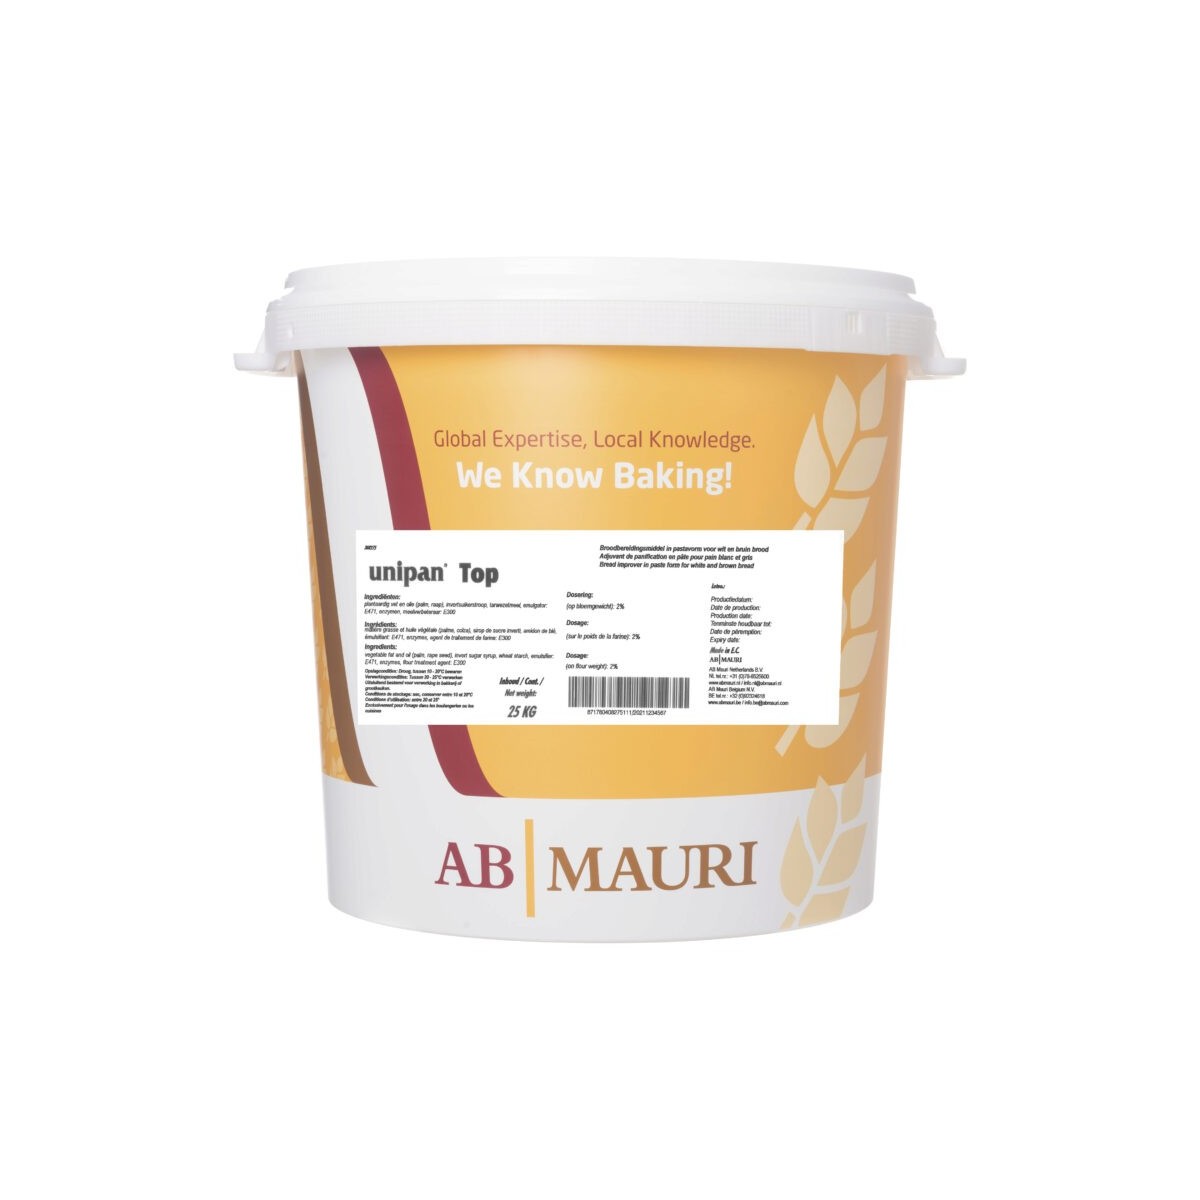 MAURI UNIPAN TOP WHITE AND GREY BREAD IMPROVER 25KG  BUCKET 